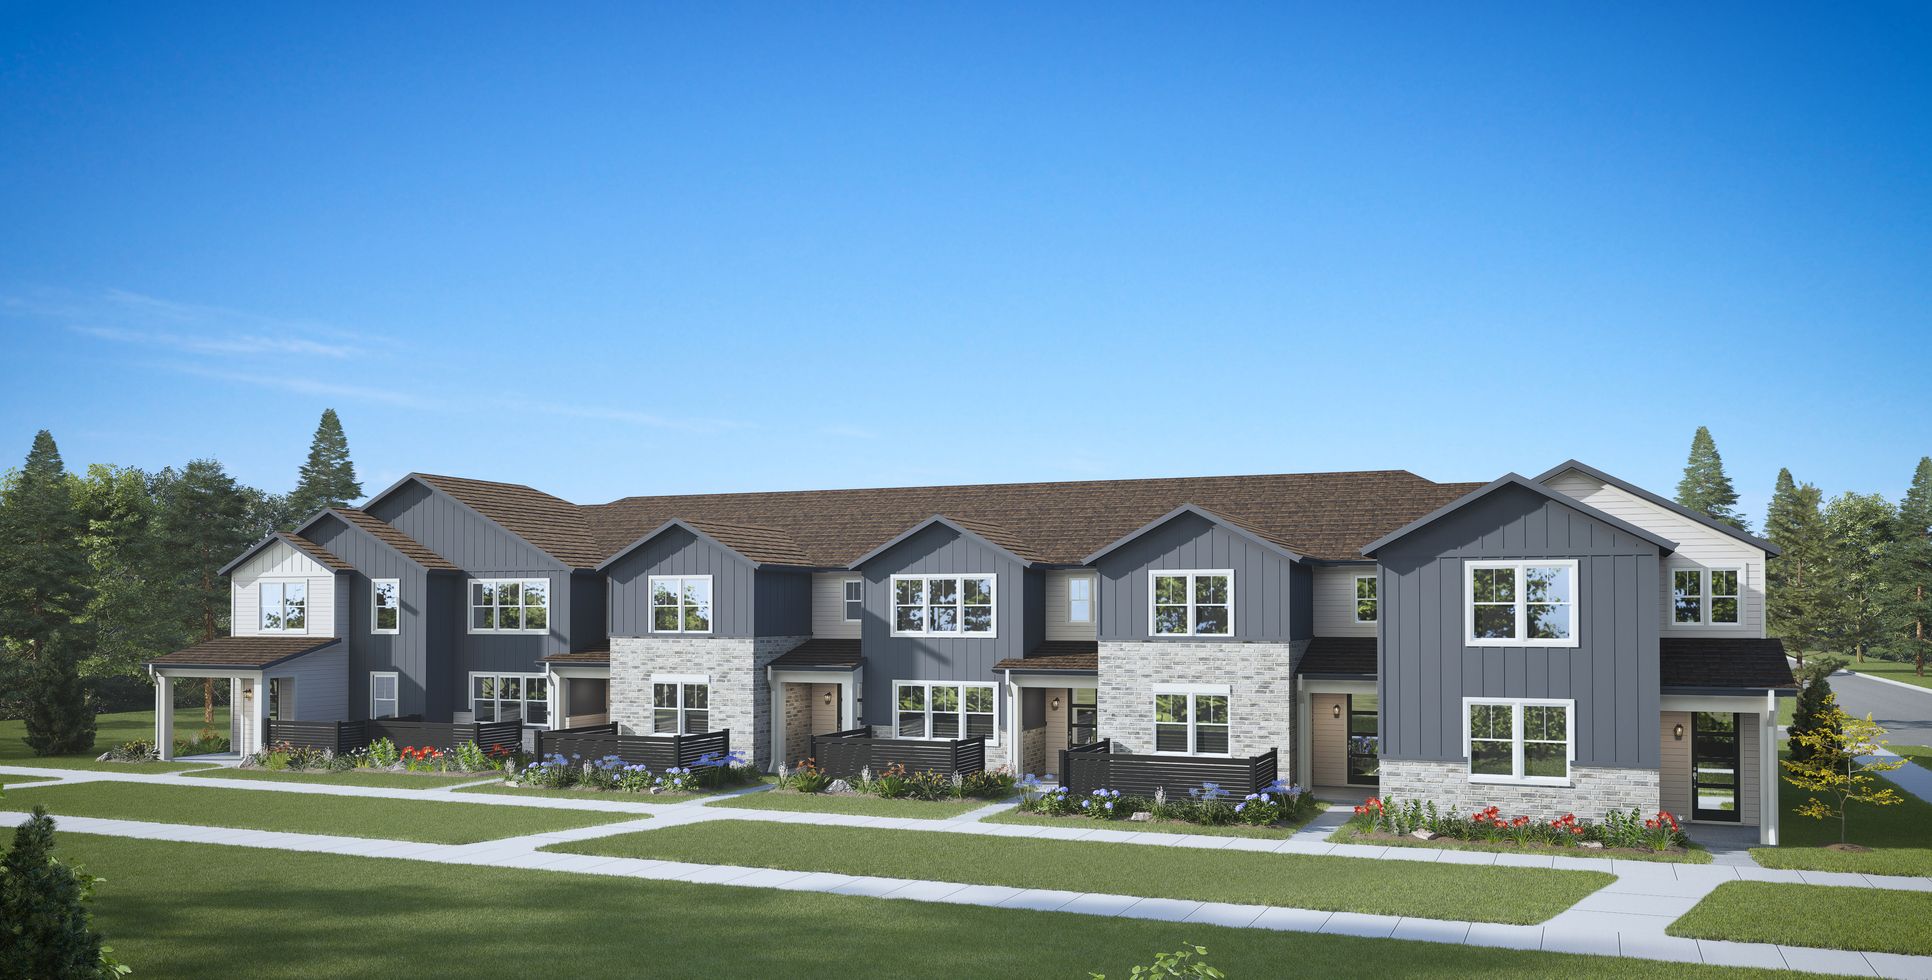 Horizon Townhomes Elevation A:Horizon Townhomes Elevation A